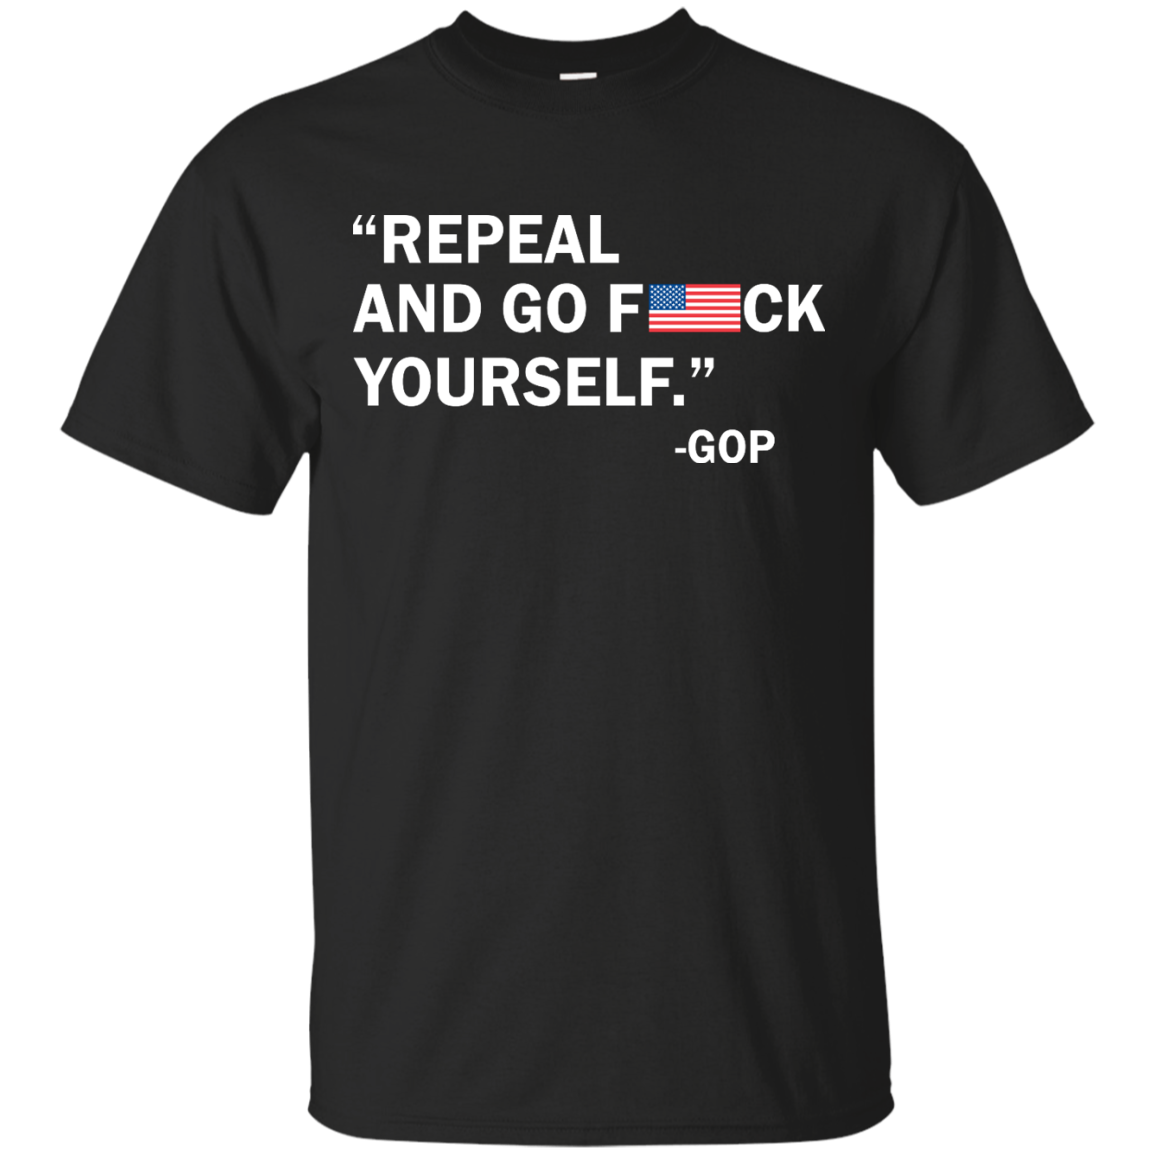 Repeal and go f yourself shirt, sweater, tank